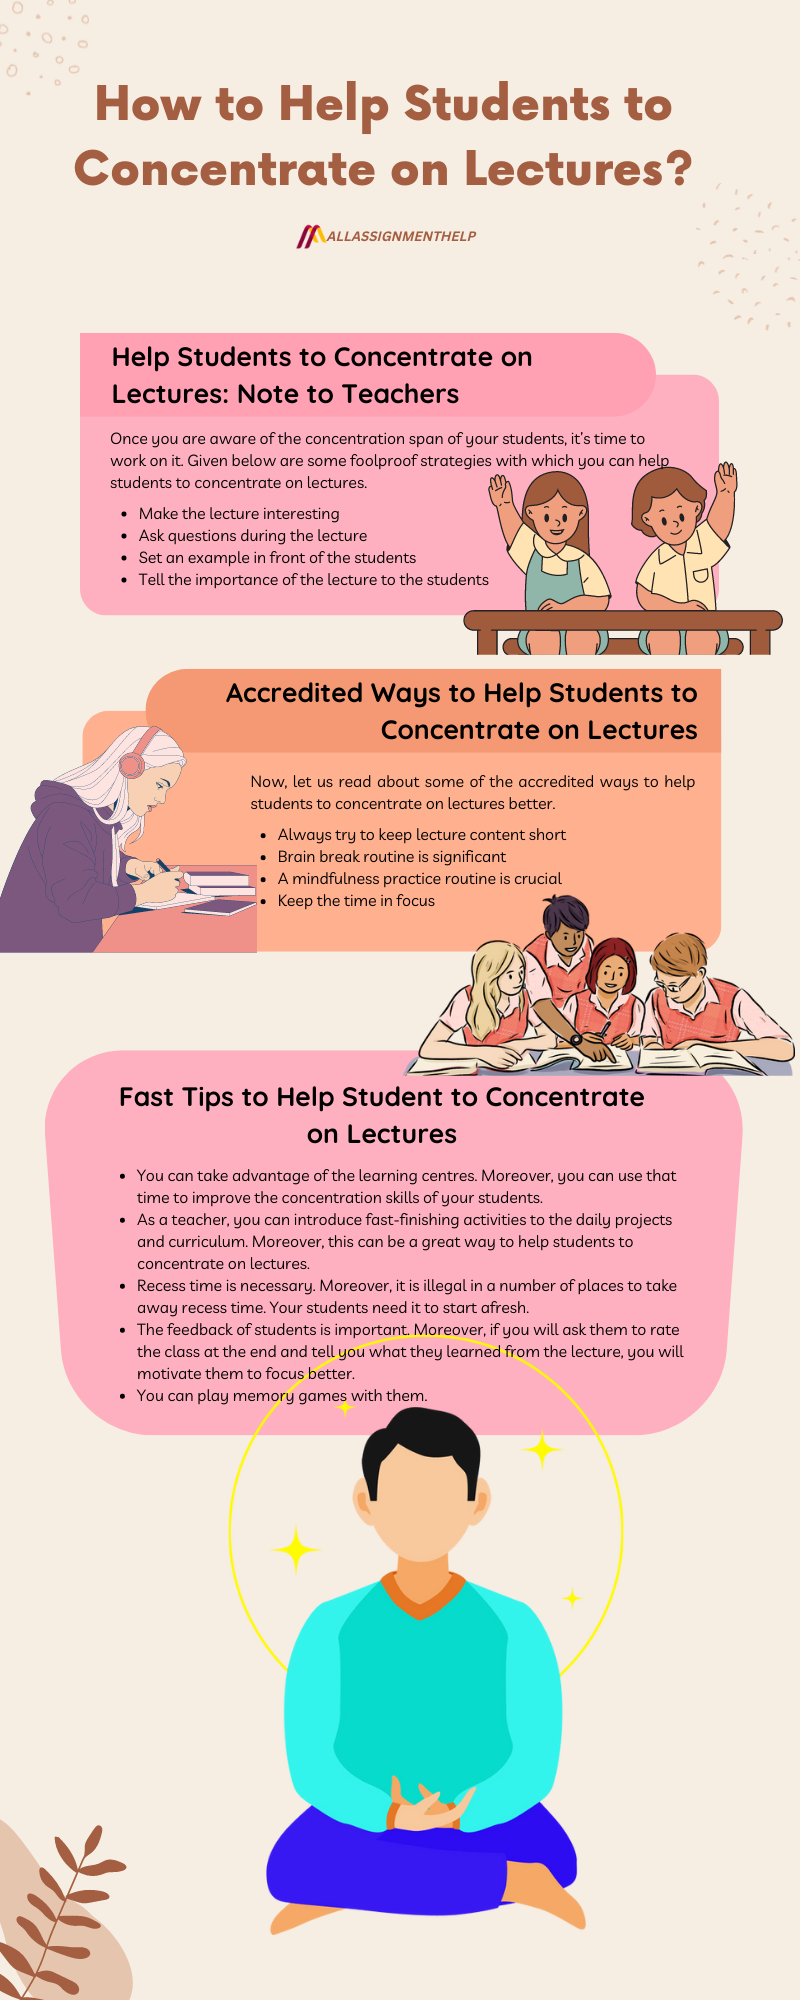 How-to-Help-Students-to-Concentrate-on-Lectures